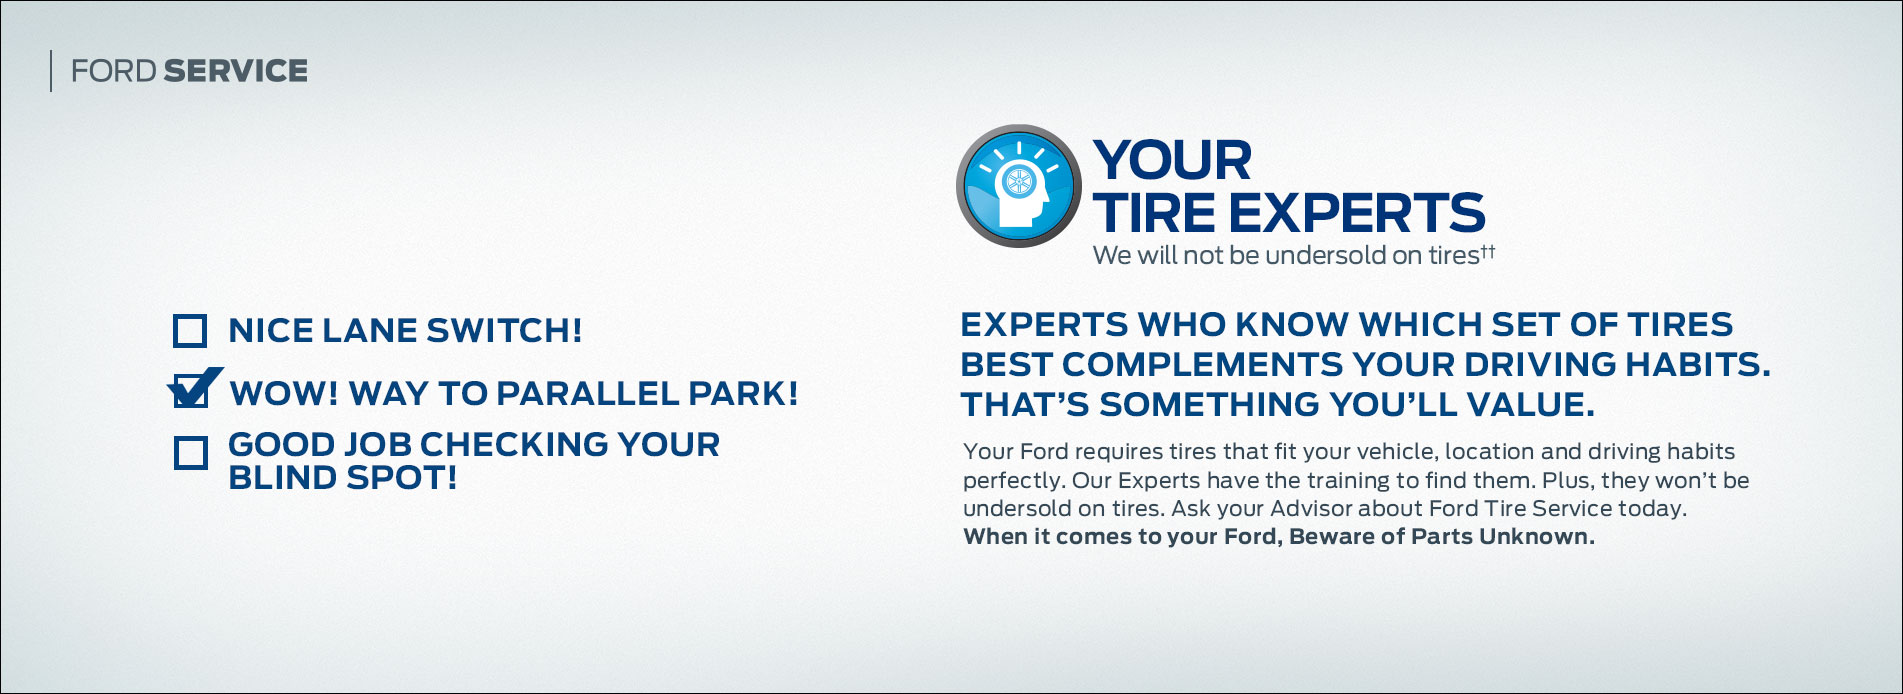 Clarenville ford inventory #5